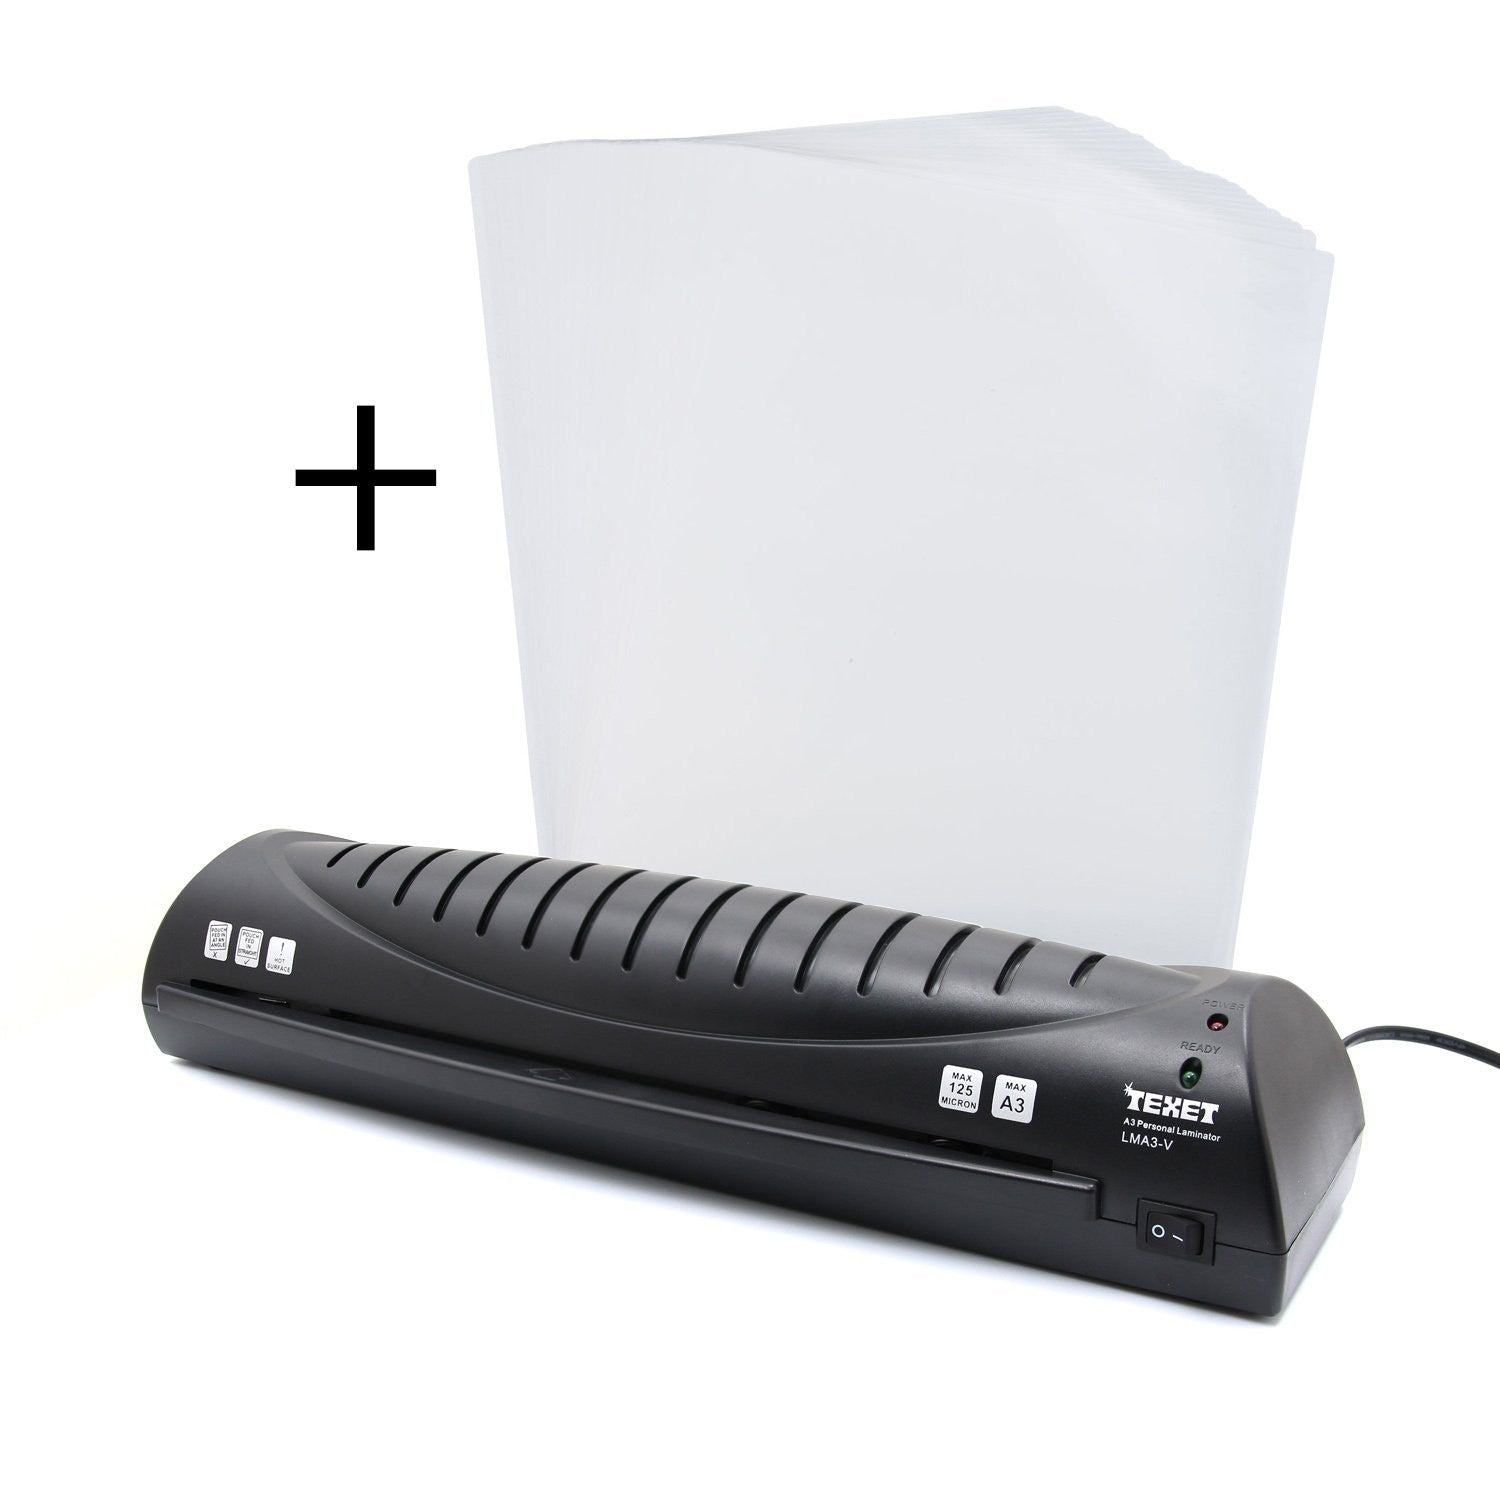 TEXET A3 / A4 Hot Laminator for Home & Office + Texet A3 pack of 25 laminating pouches